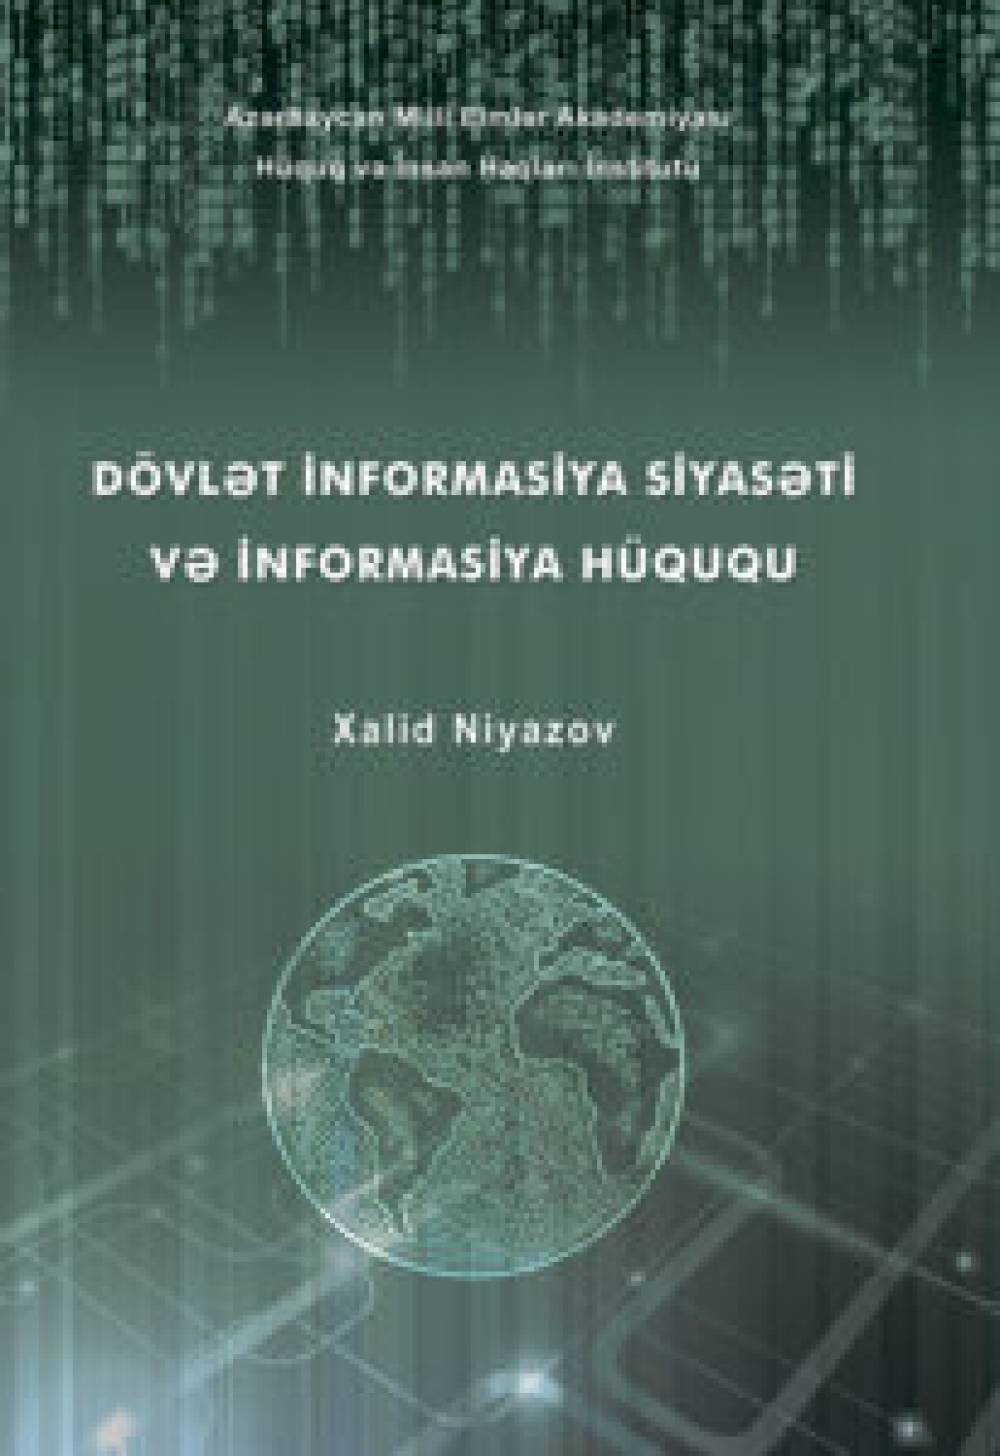 Khalid Niyazov: State Information Policy and Information Law (monography)